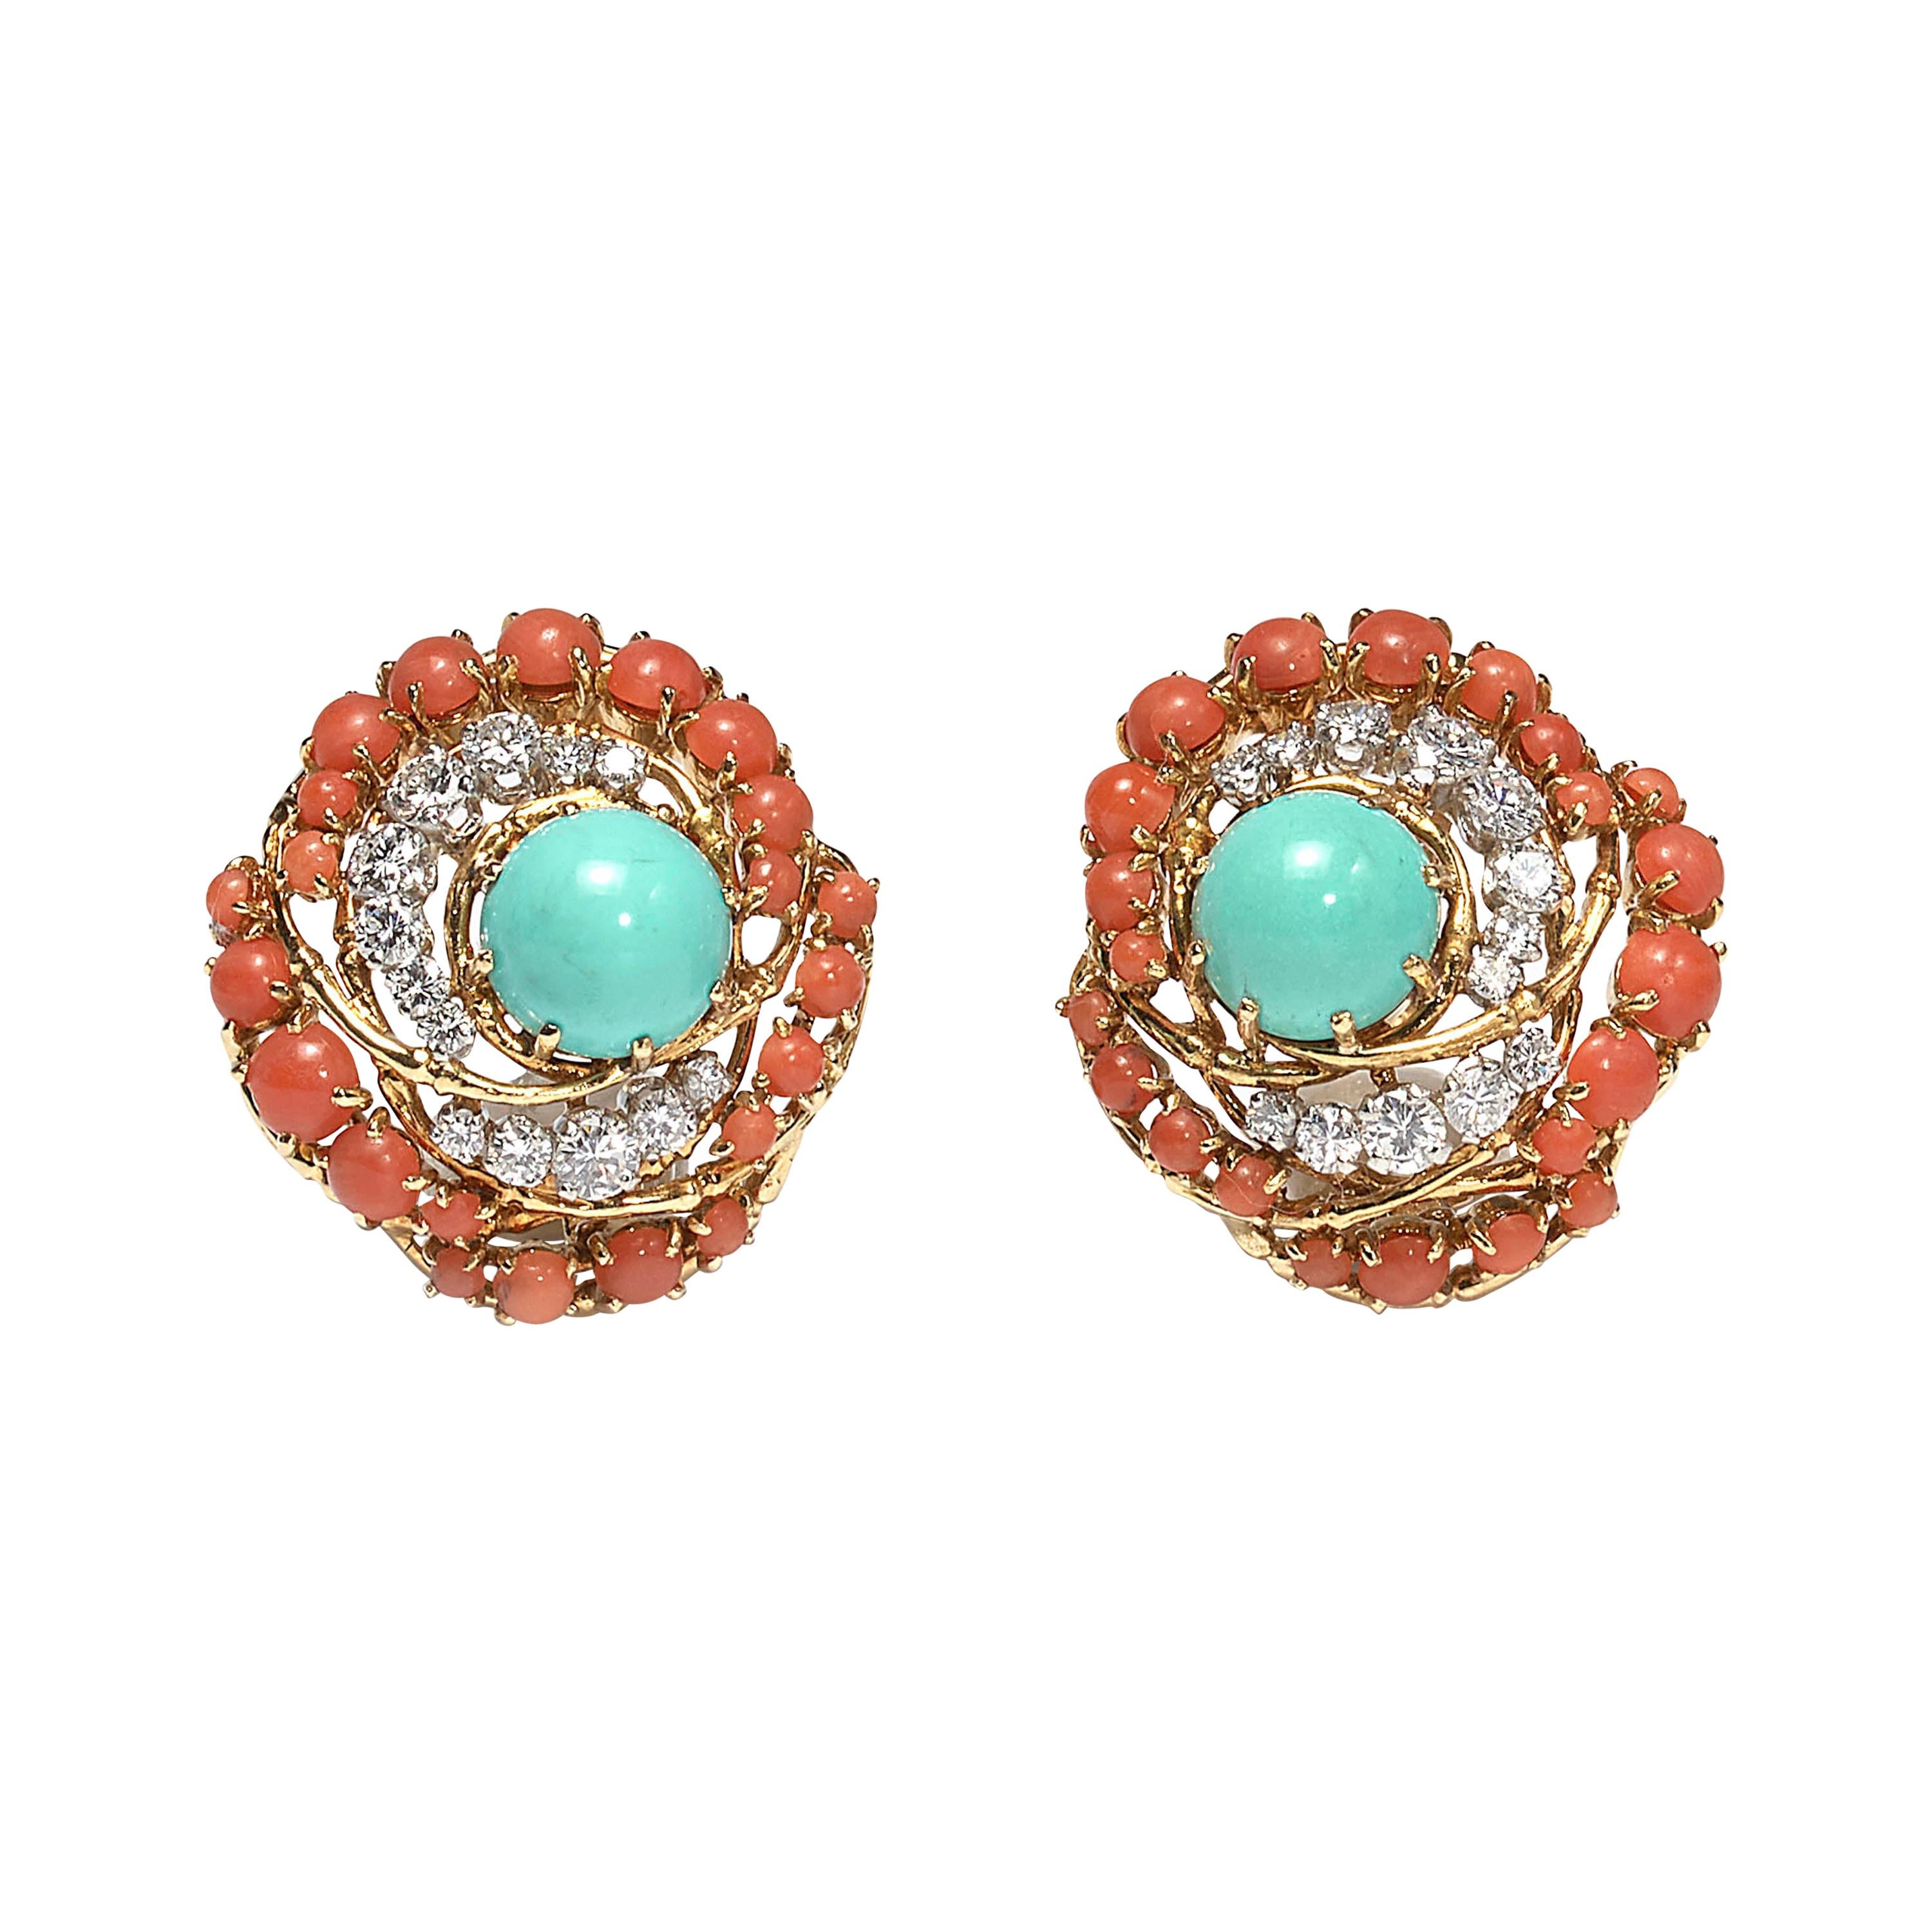 Vintage Turquoise, Coral and Diamond Ear Clips